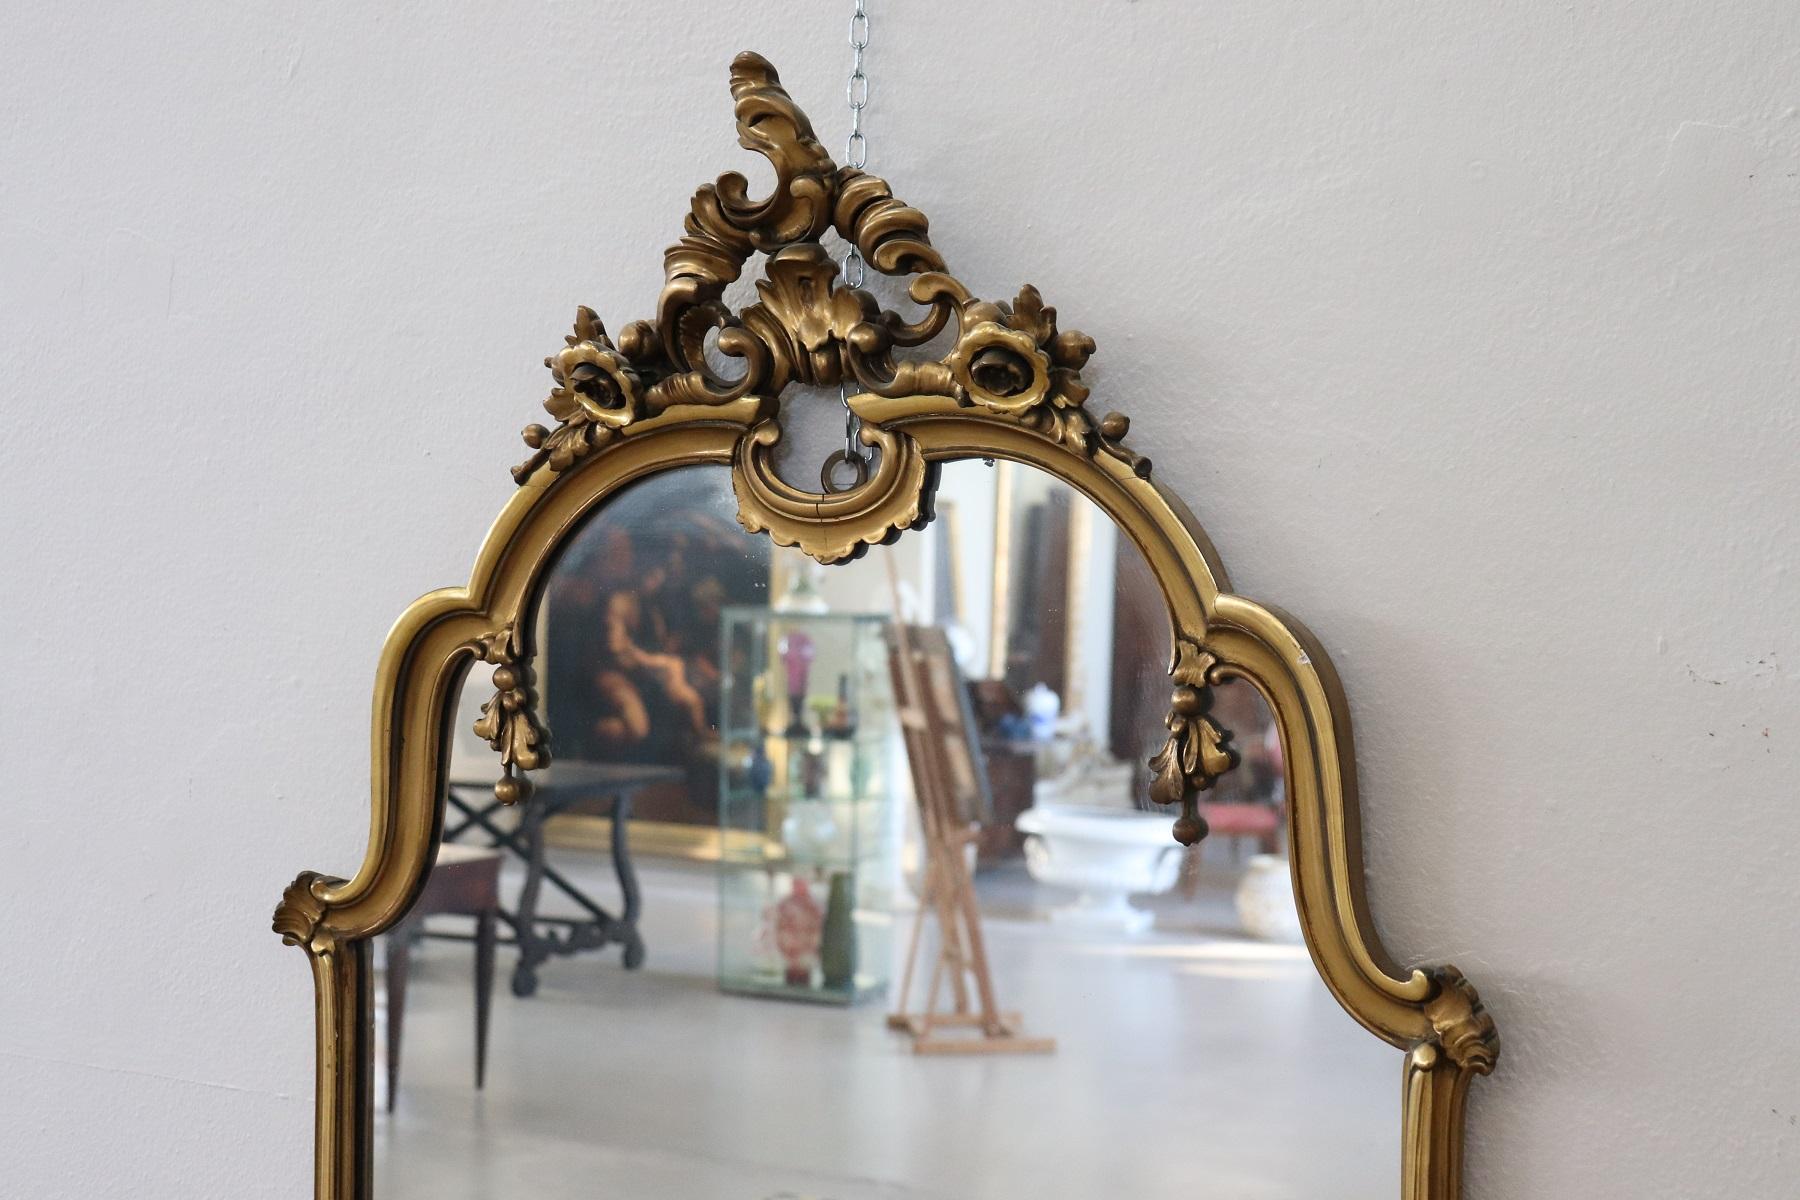 Beautiful elegant large mirror in perfect Baroque style wood finely and richly carved with swirls of great refinement decorated in gold.